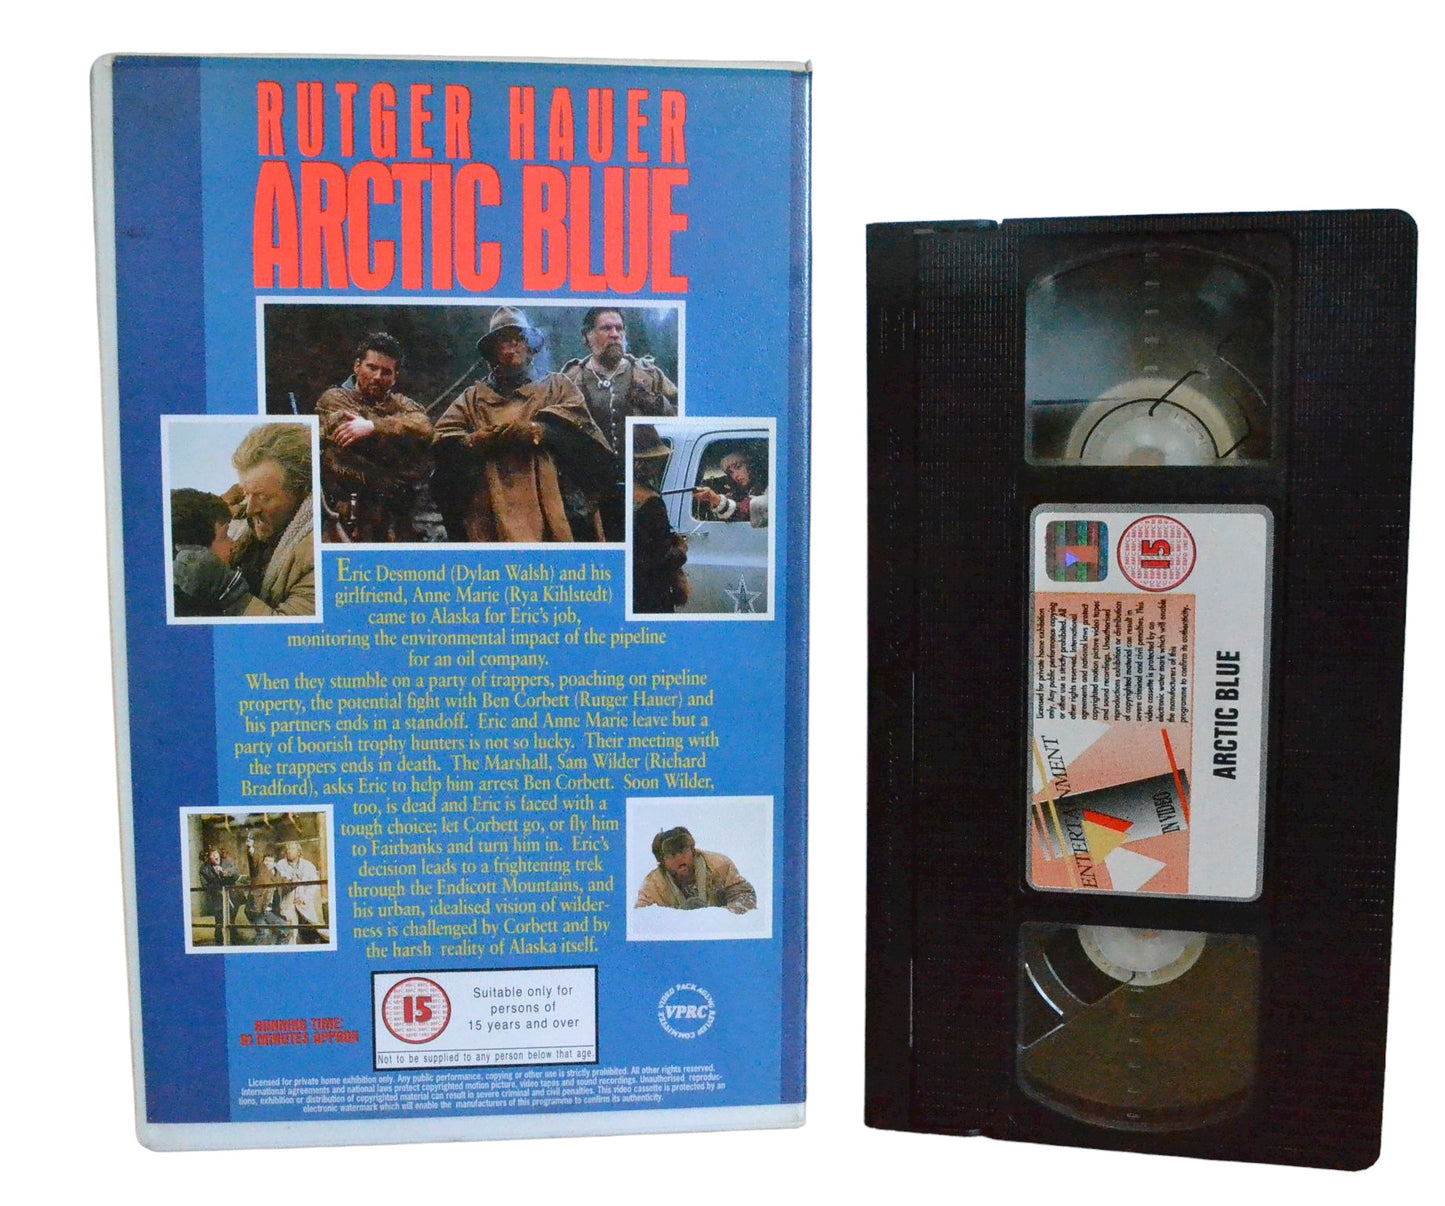 Arctic Blue (Hell... At The Of Civilisation) - Rutger Hauer - Entertainment in Video - Action - Large Box - Pal VHS-